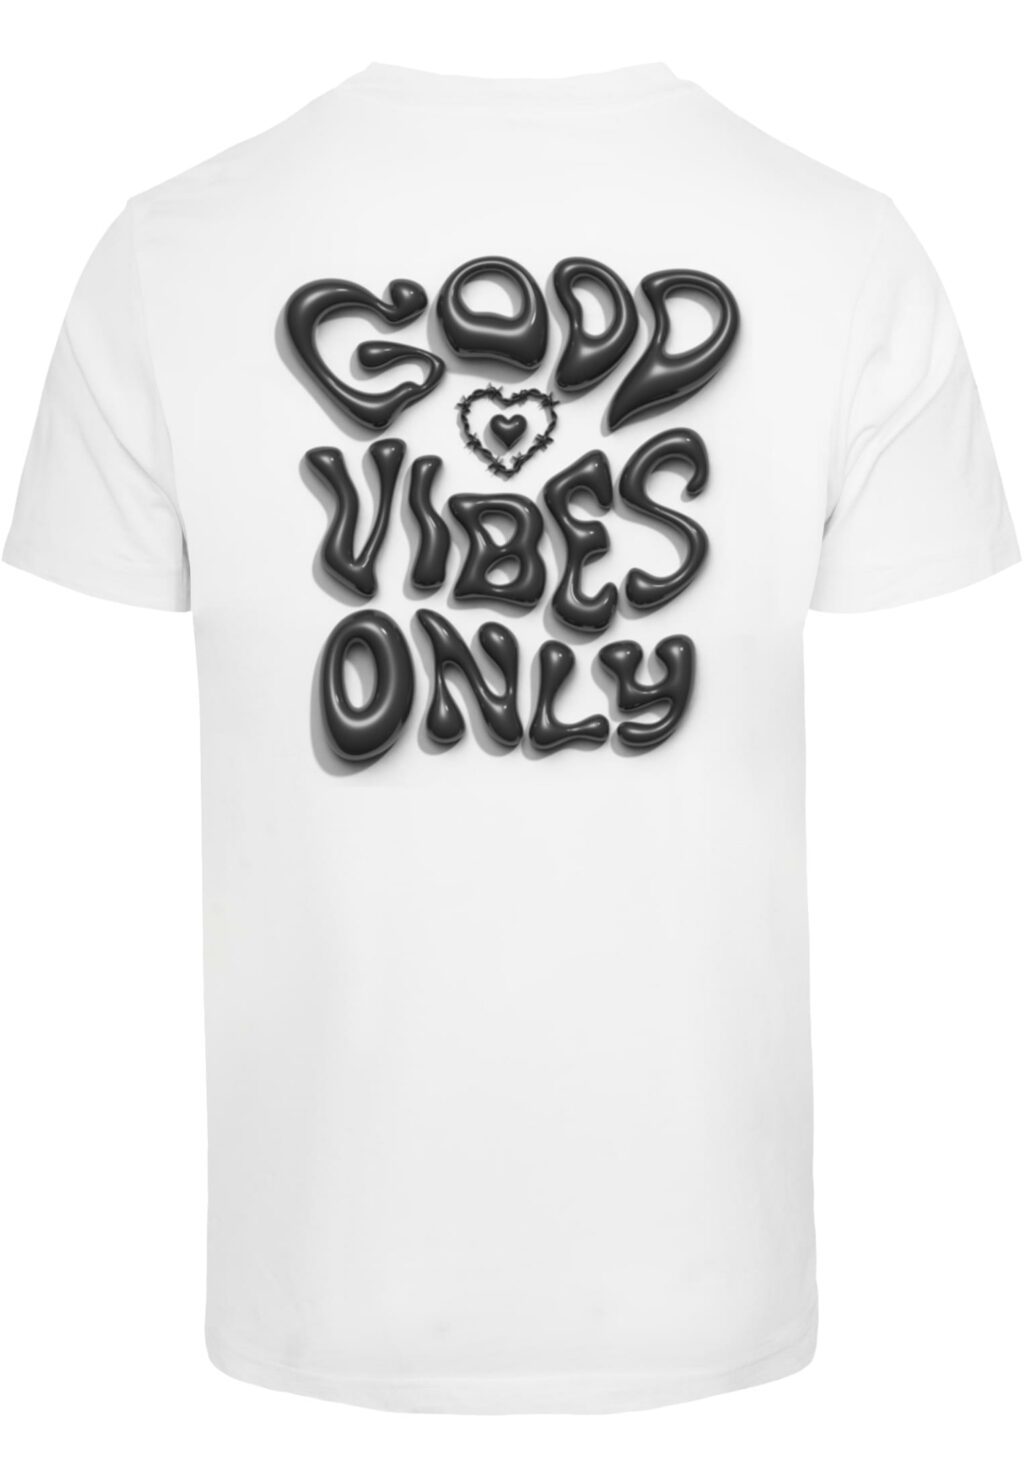 Good Vibes Only Tee white MT3175